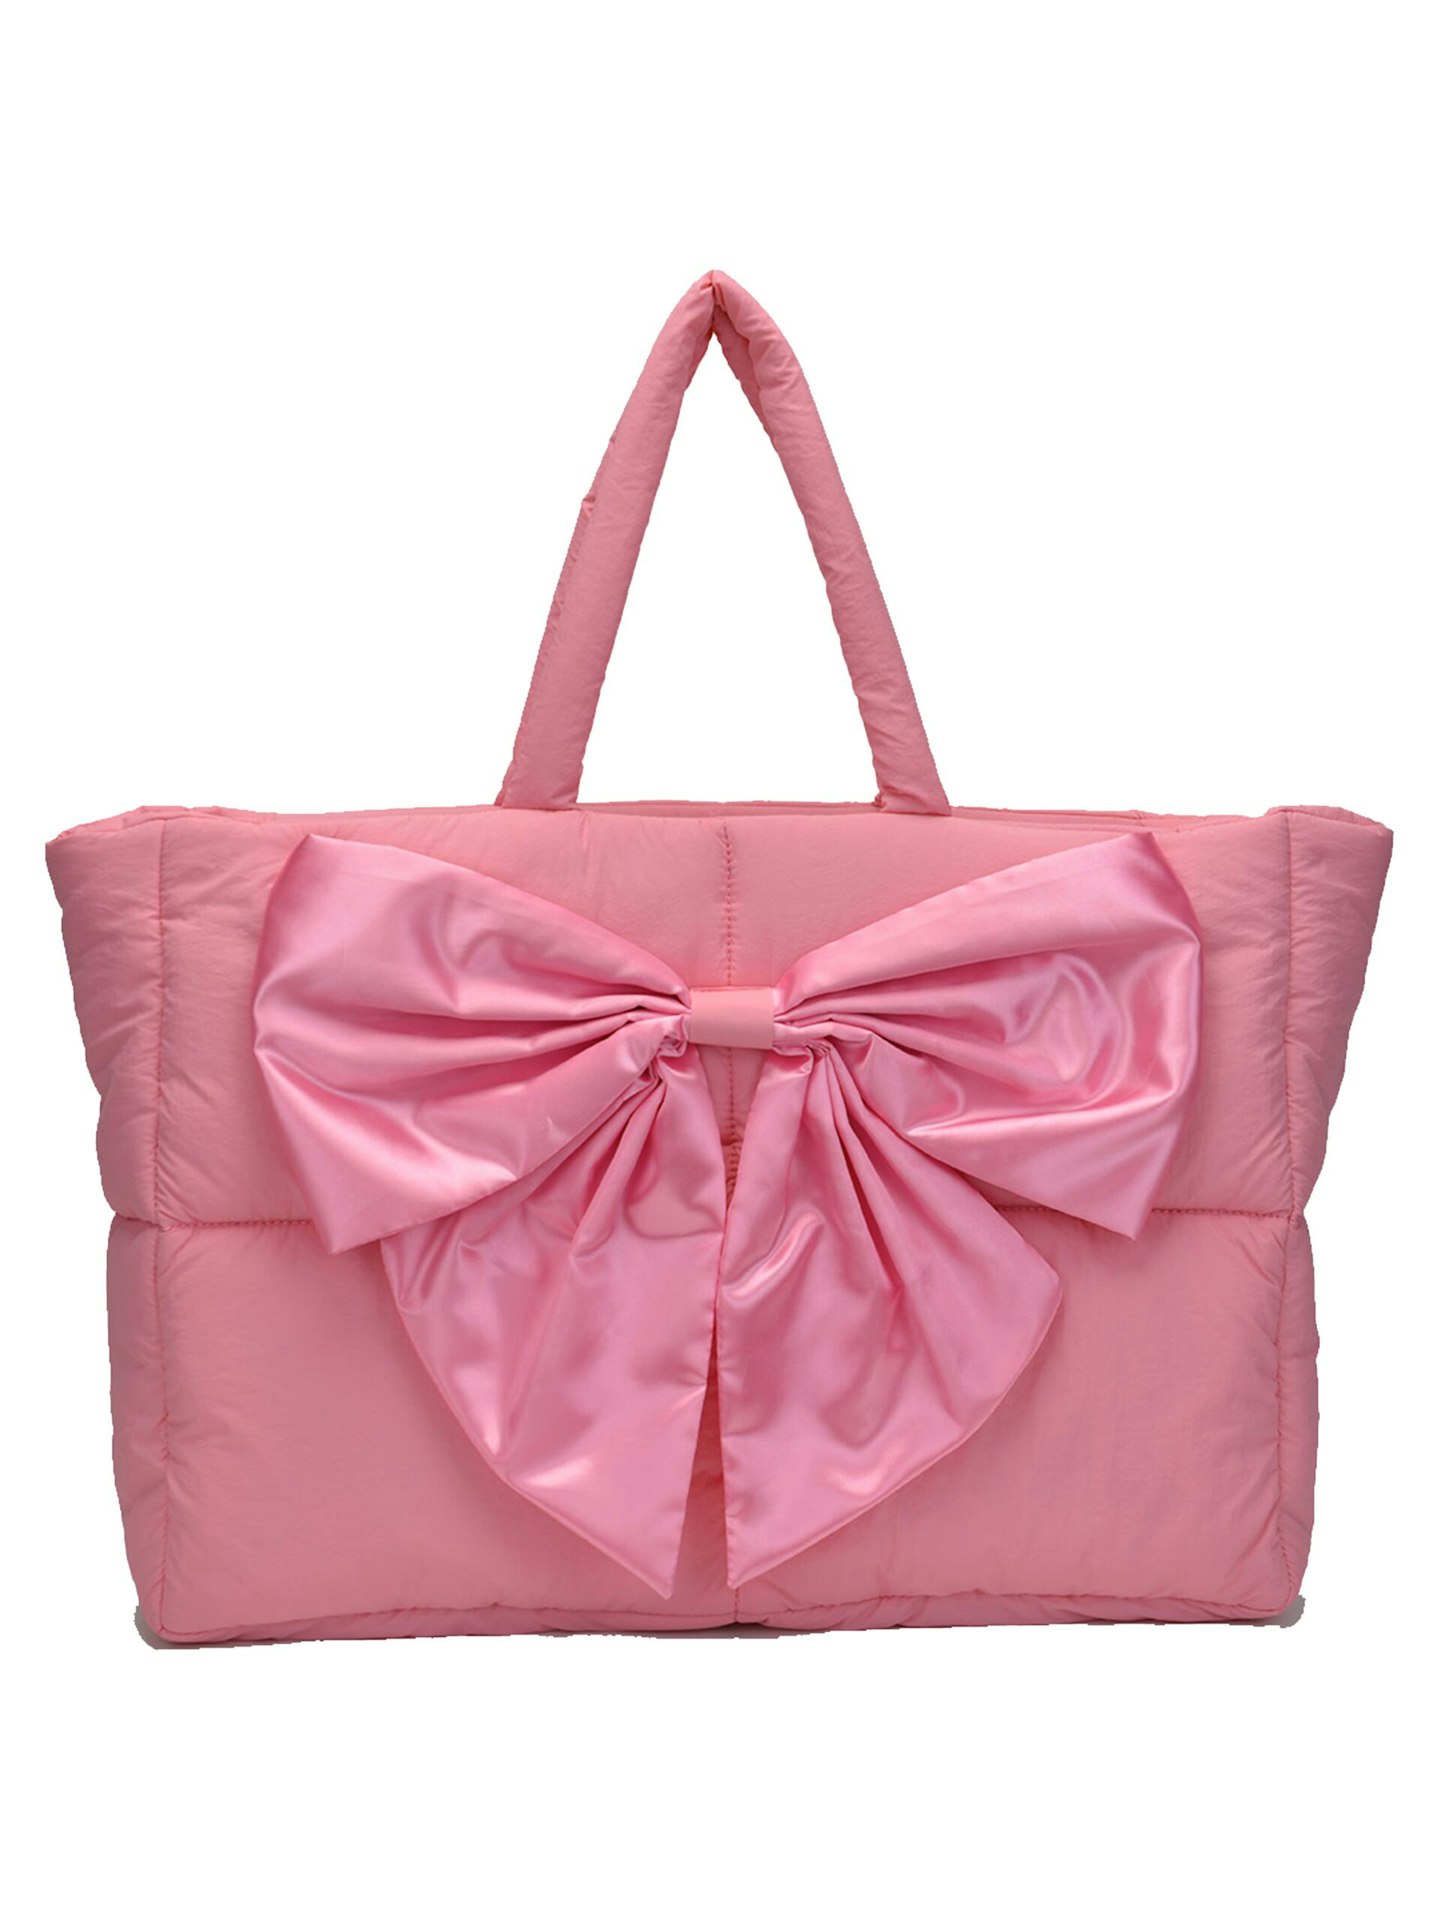 Parallel X Studio, Bow Tote Pink